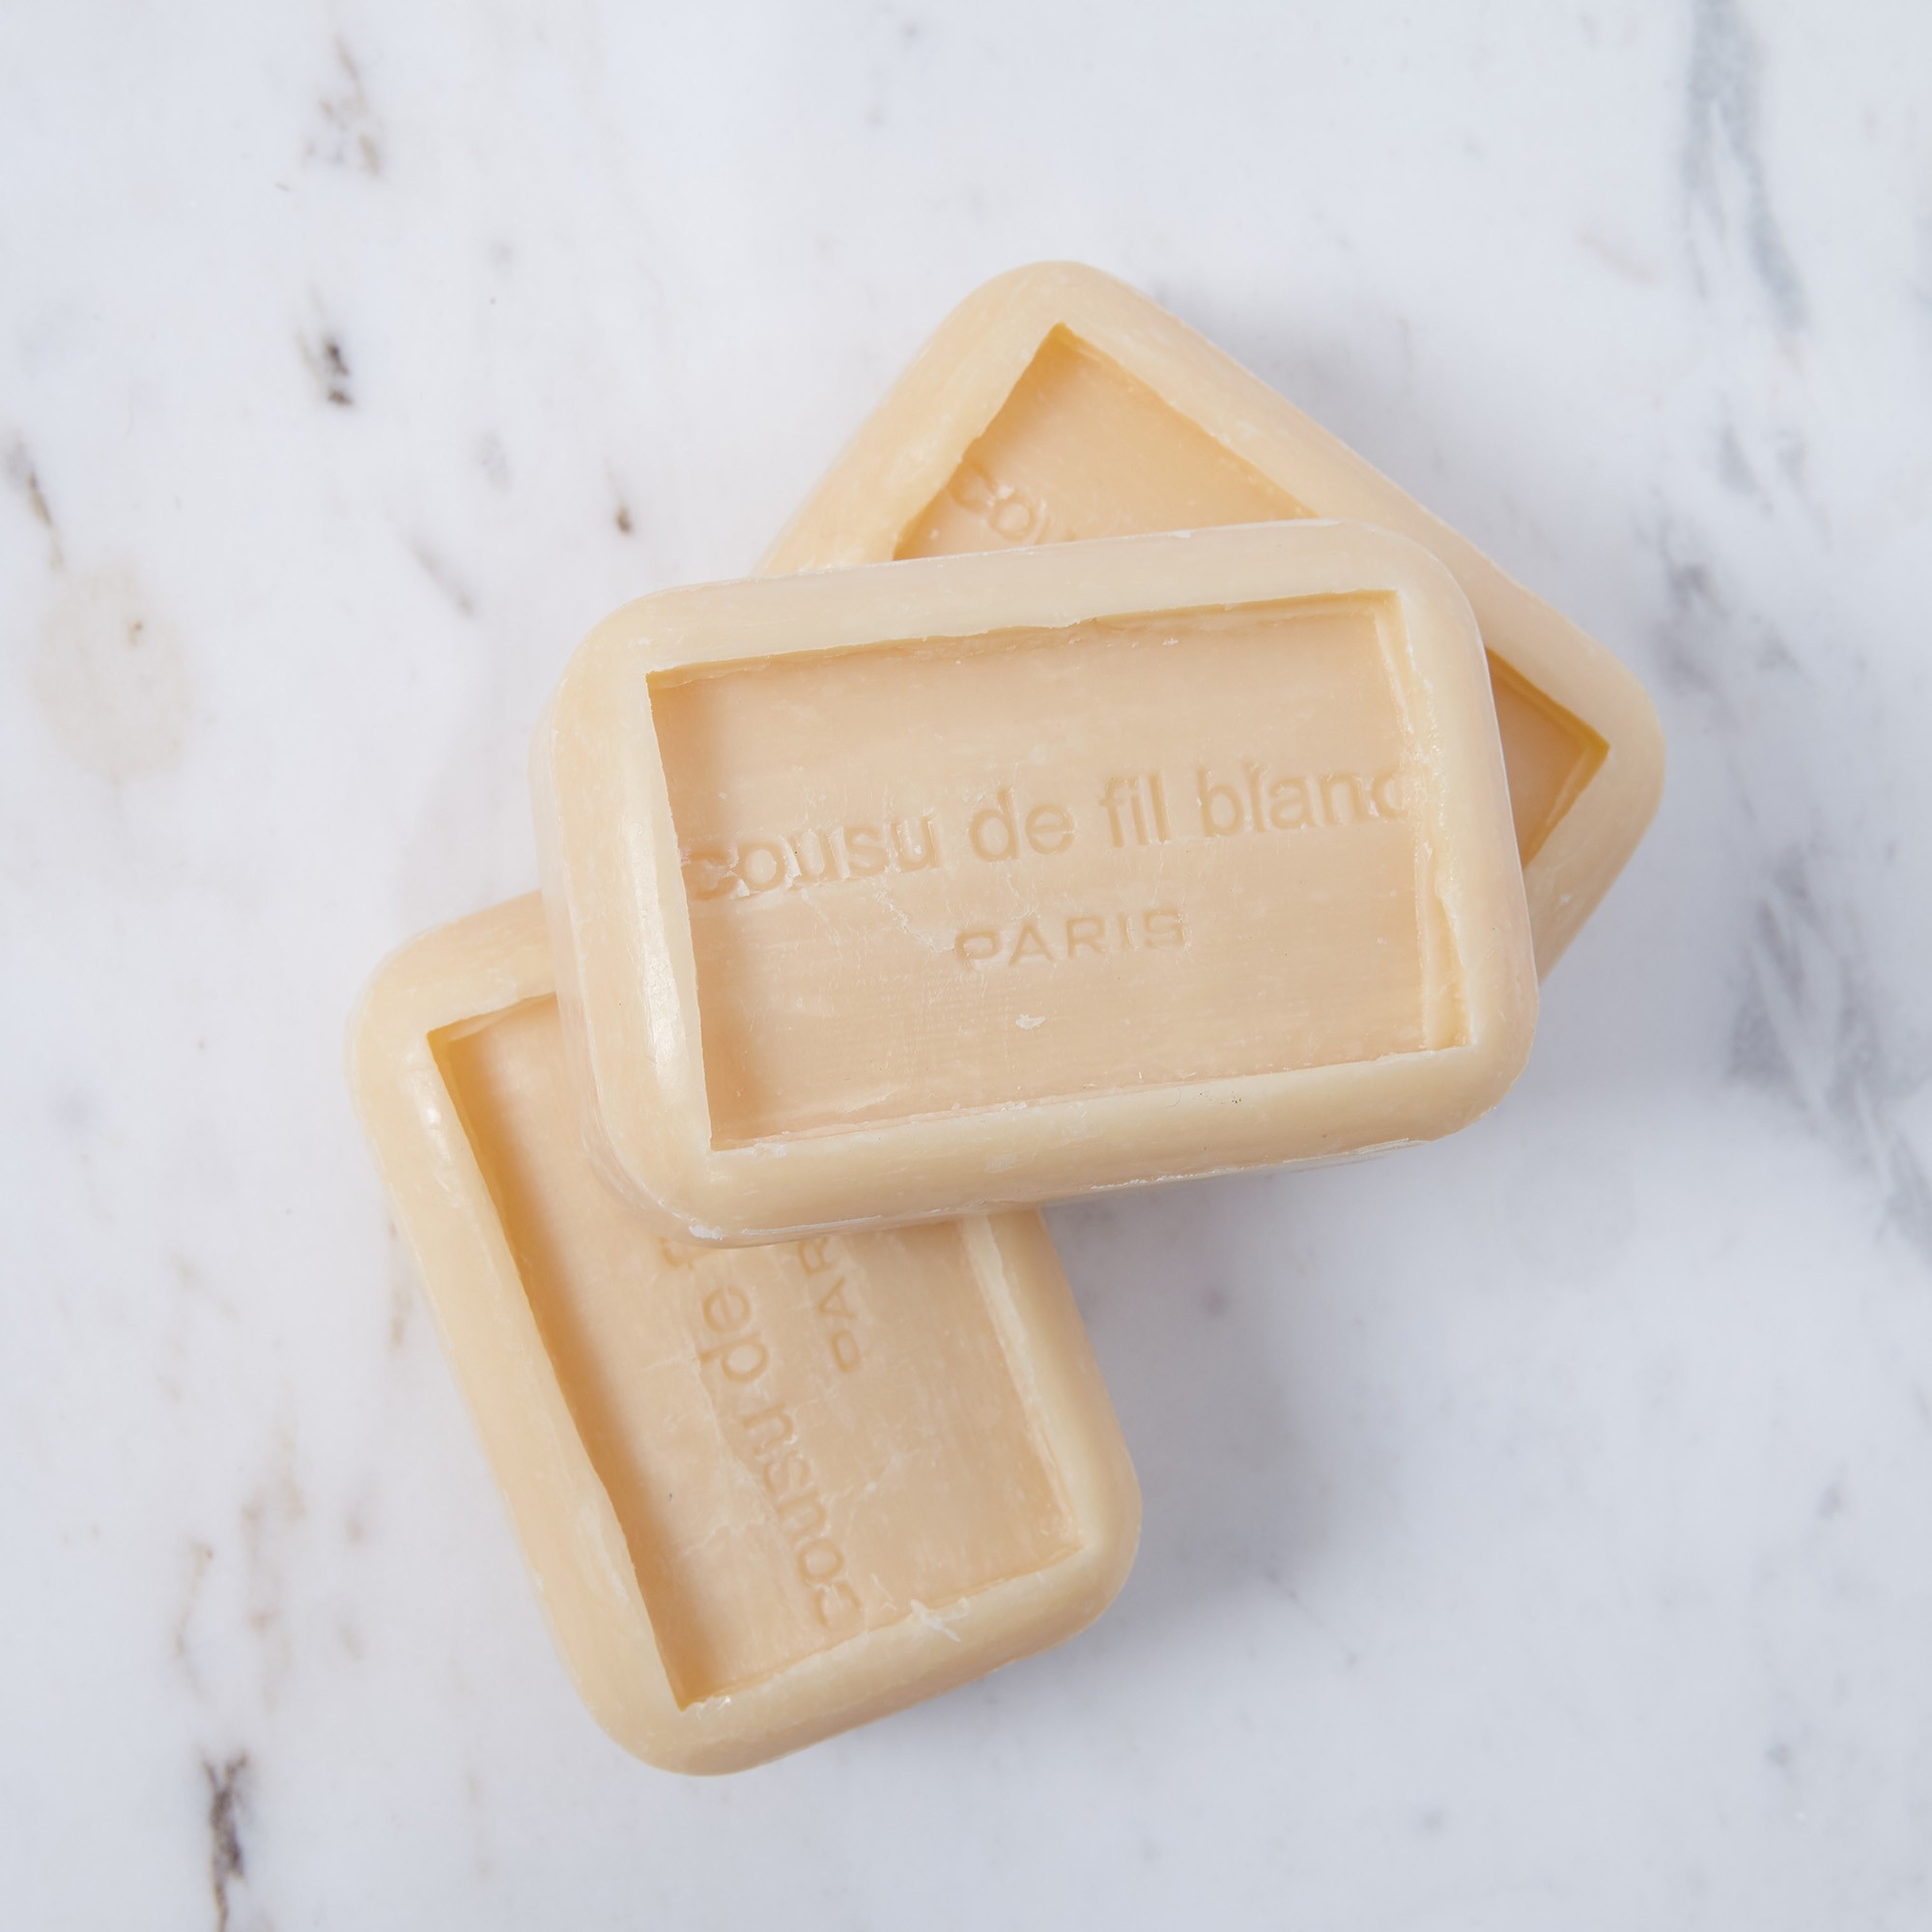 small bars of soap